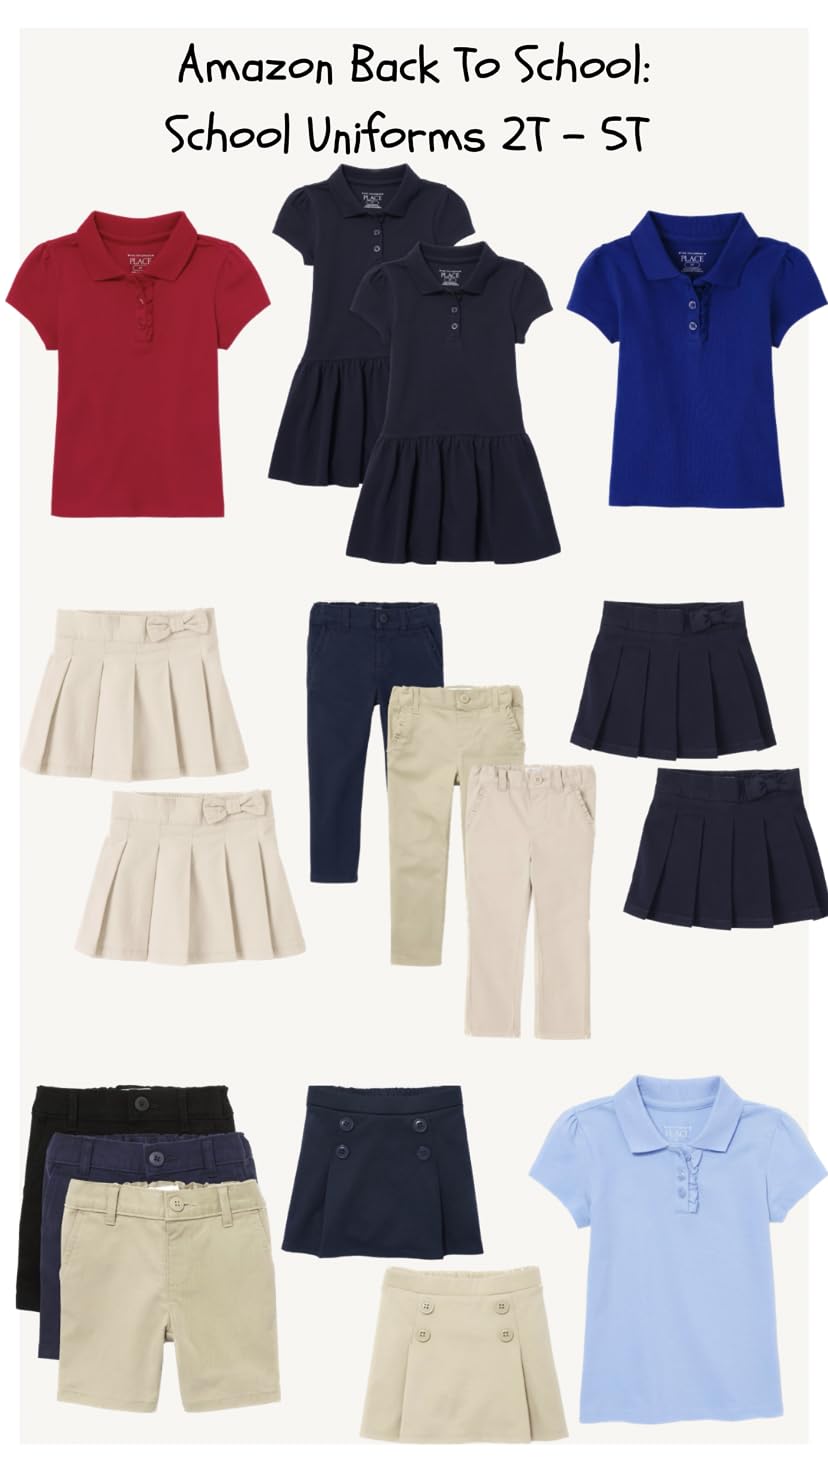 Back To School Uniforms For Toddler Girls 2T-5T!